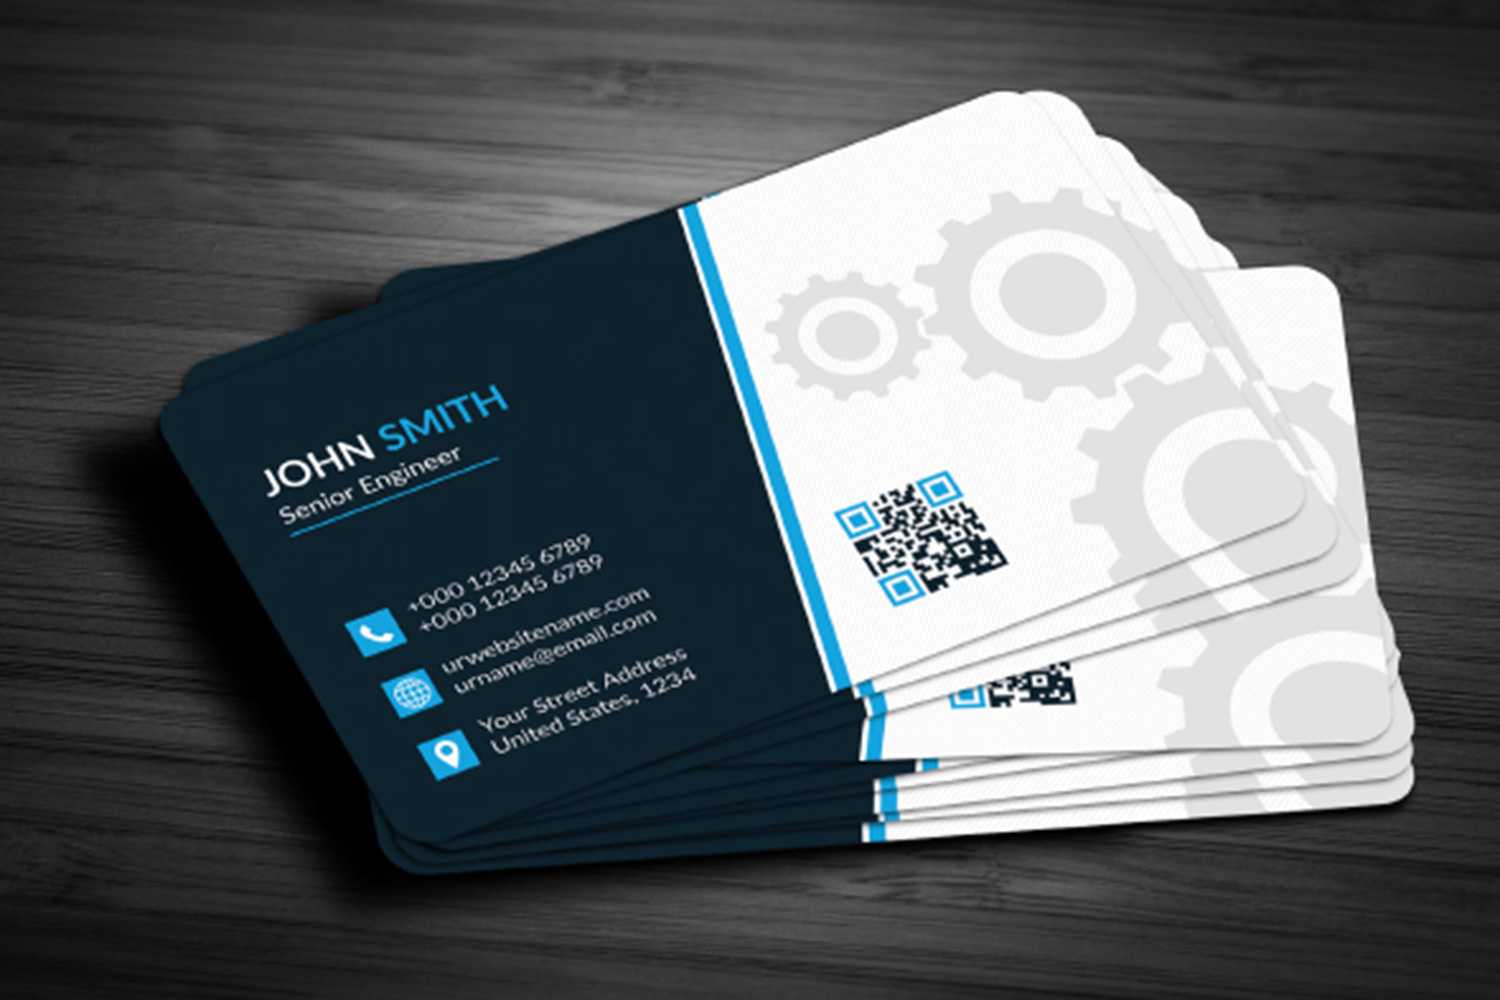 009 Business Card Template Free Download Ideas Ms Unusual Pertaining To Free Complimentary Card Templates